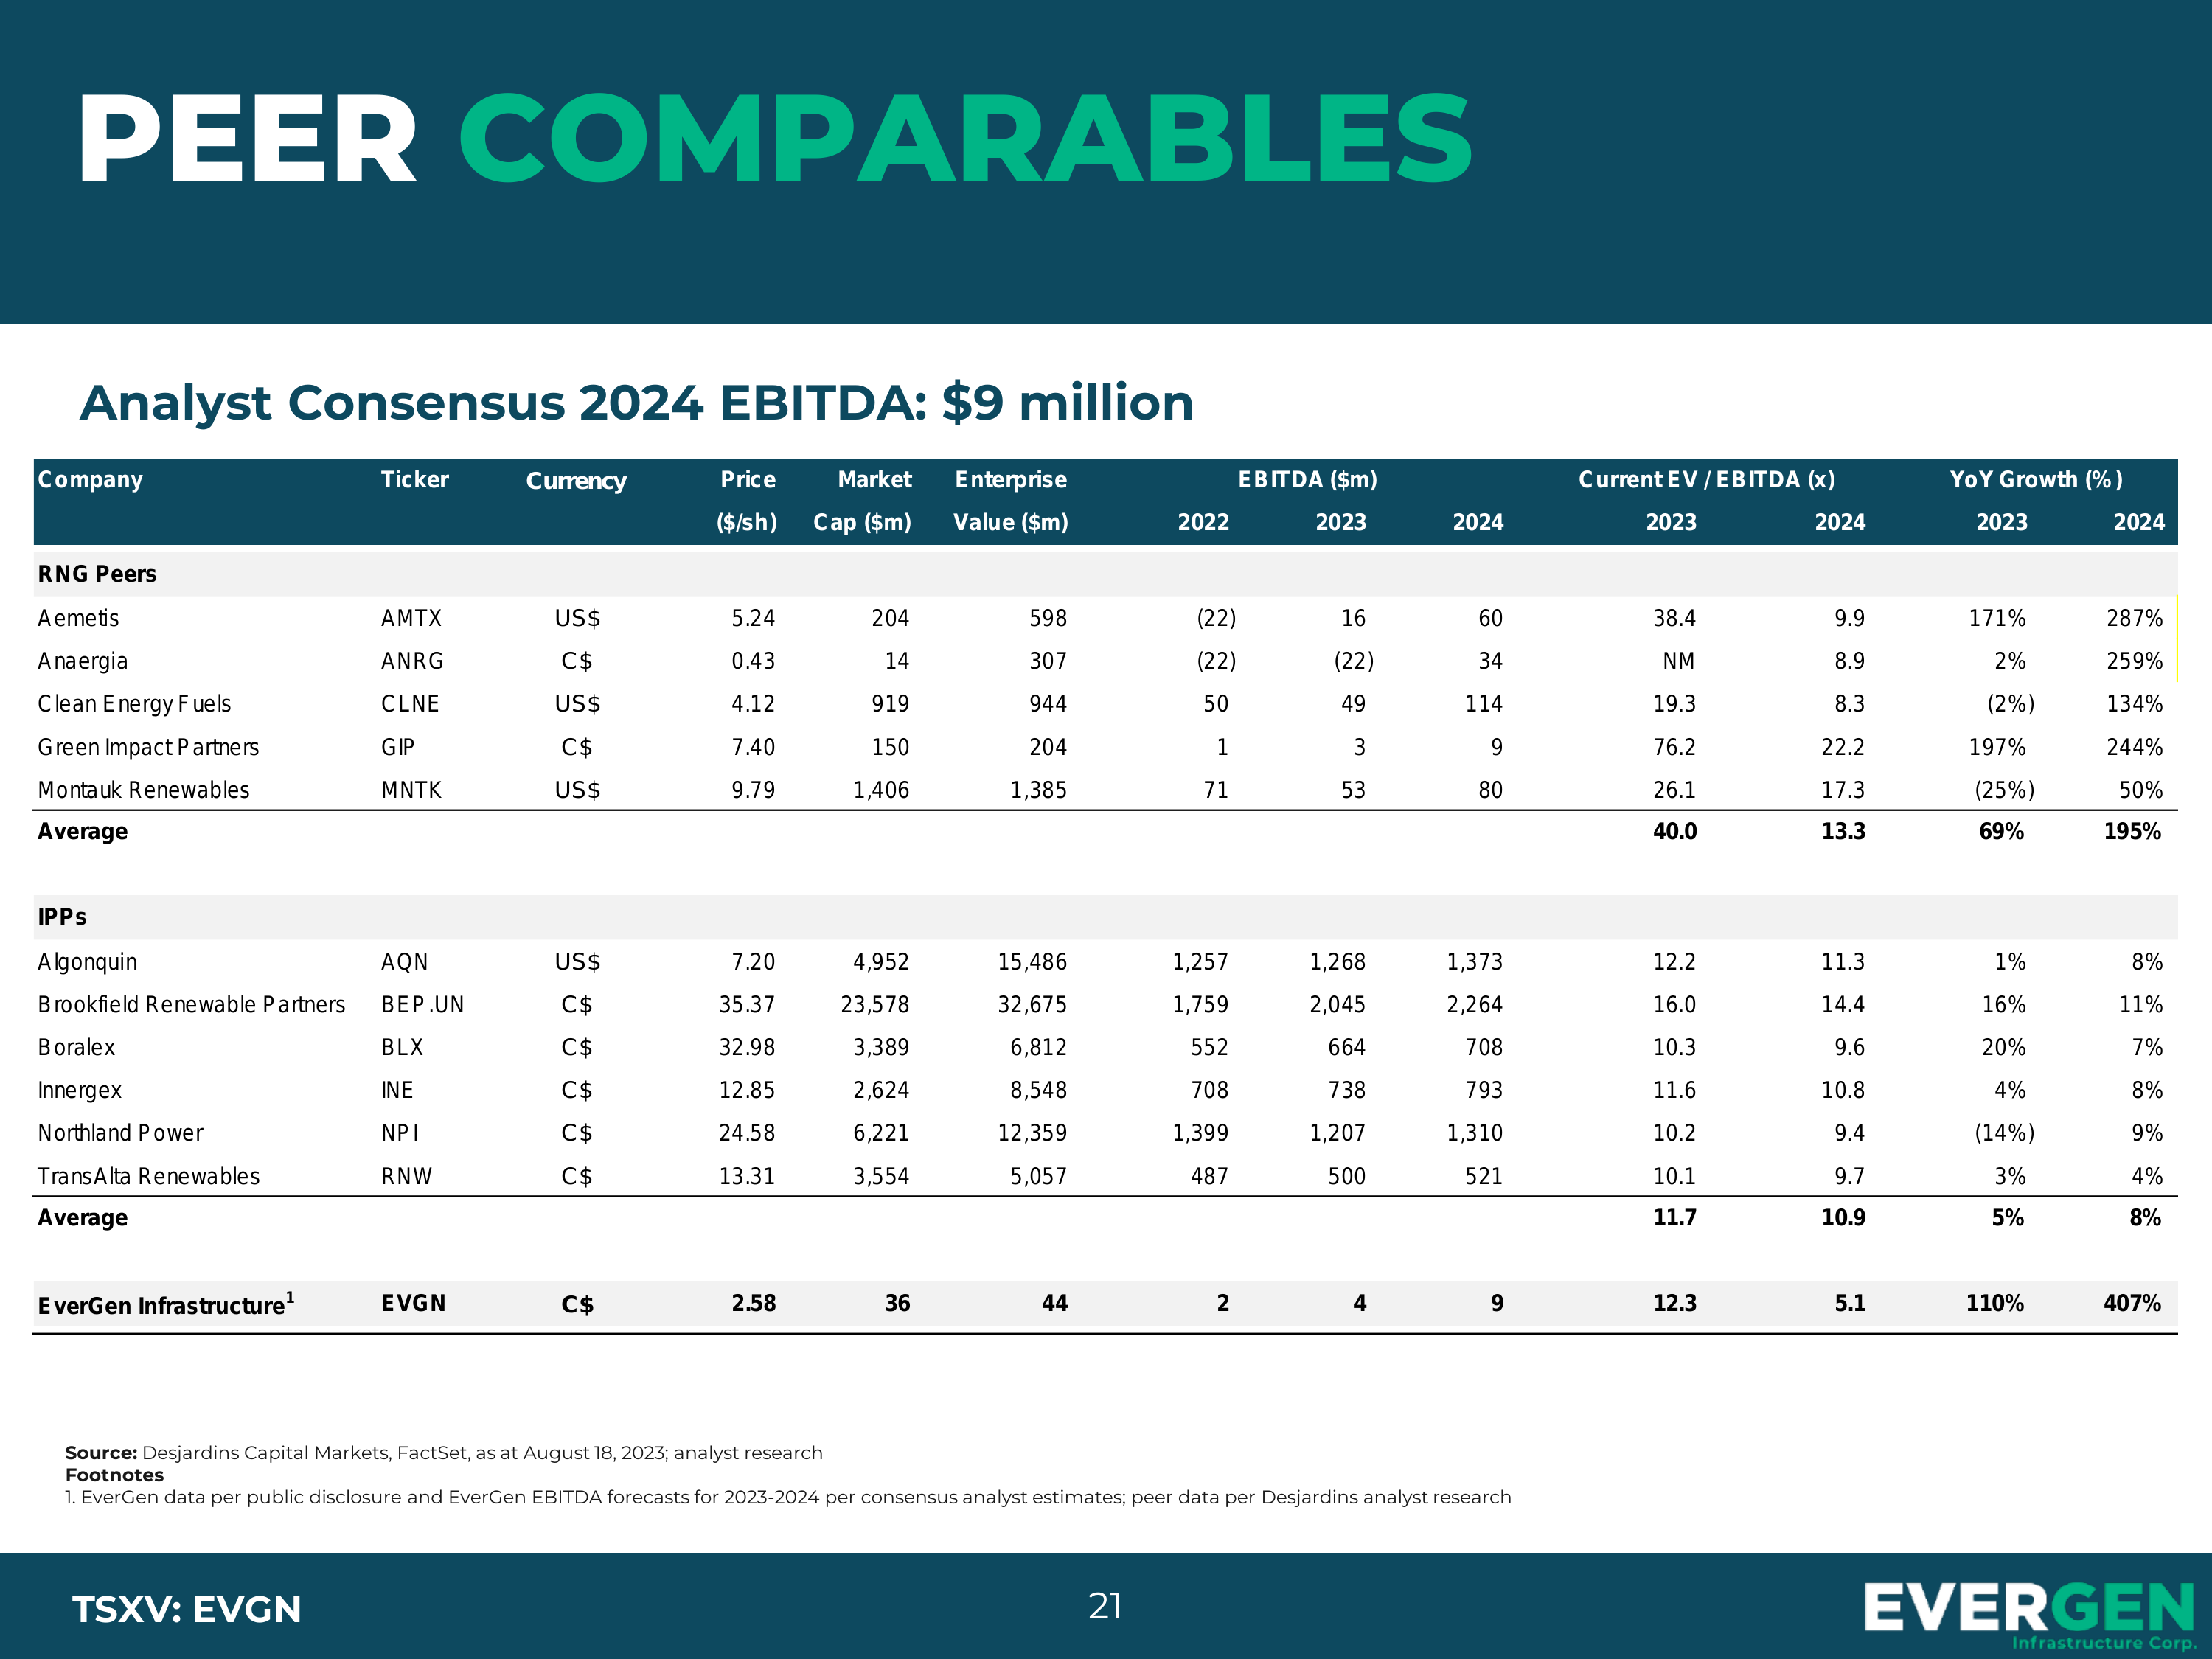 PEER COMPARABLES 

A